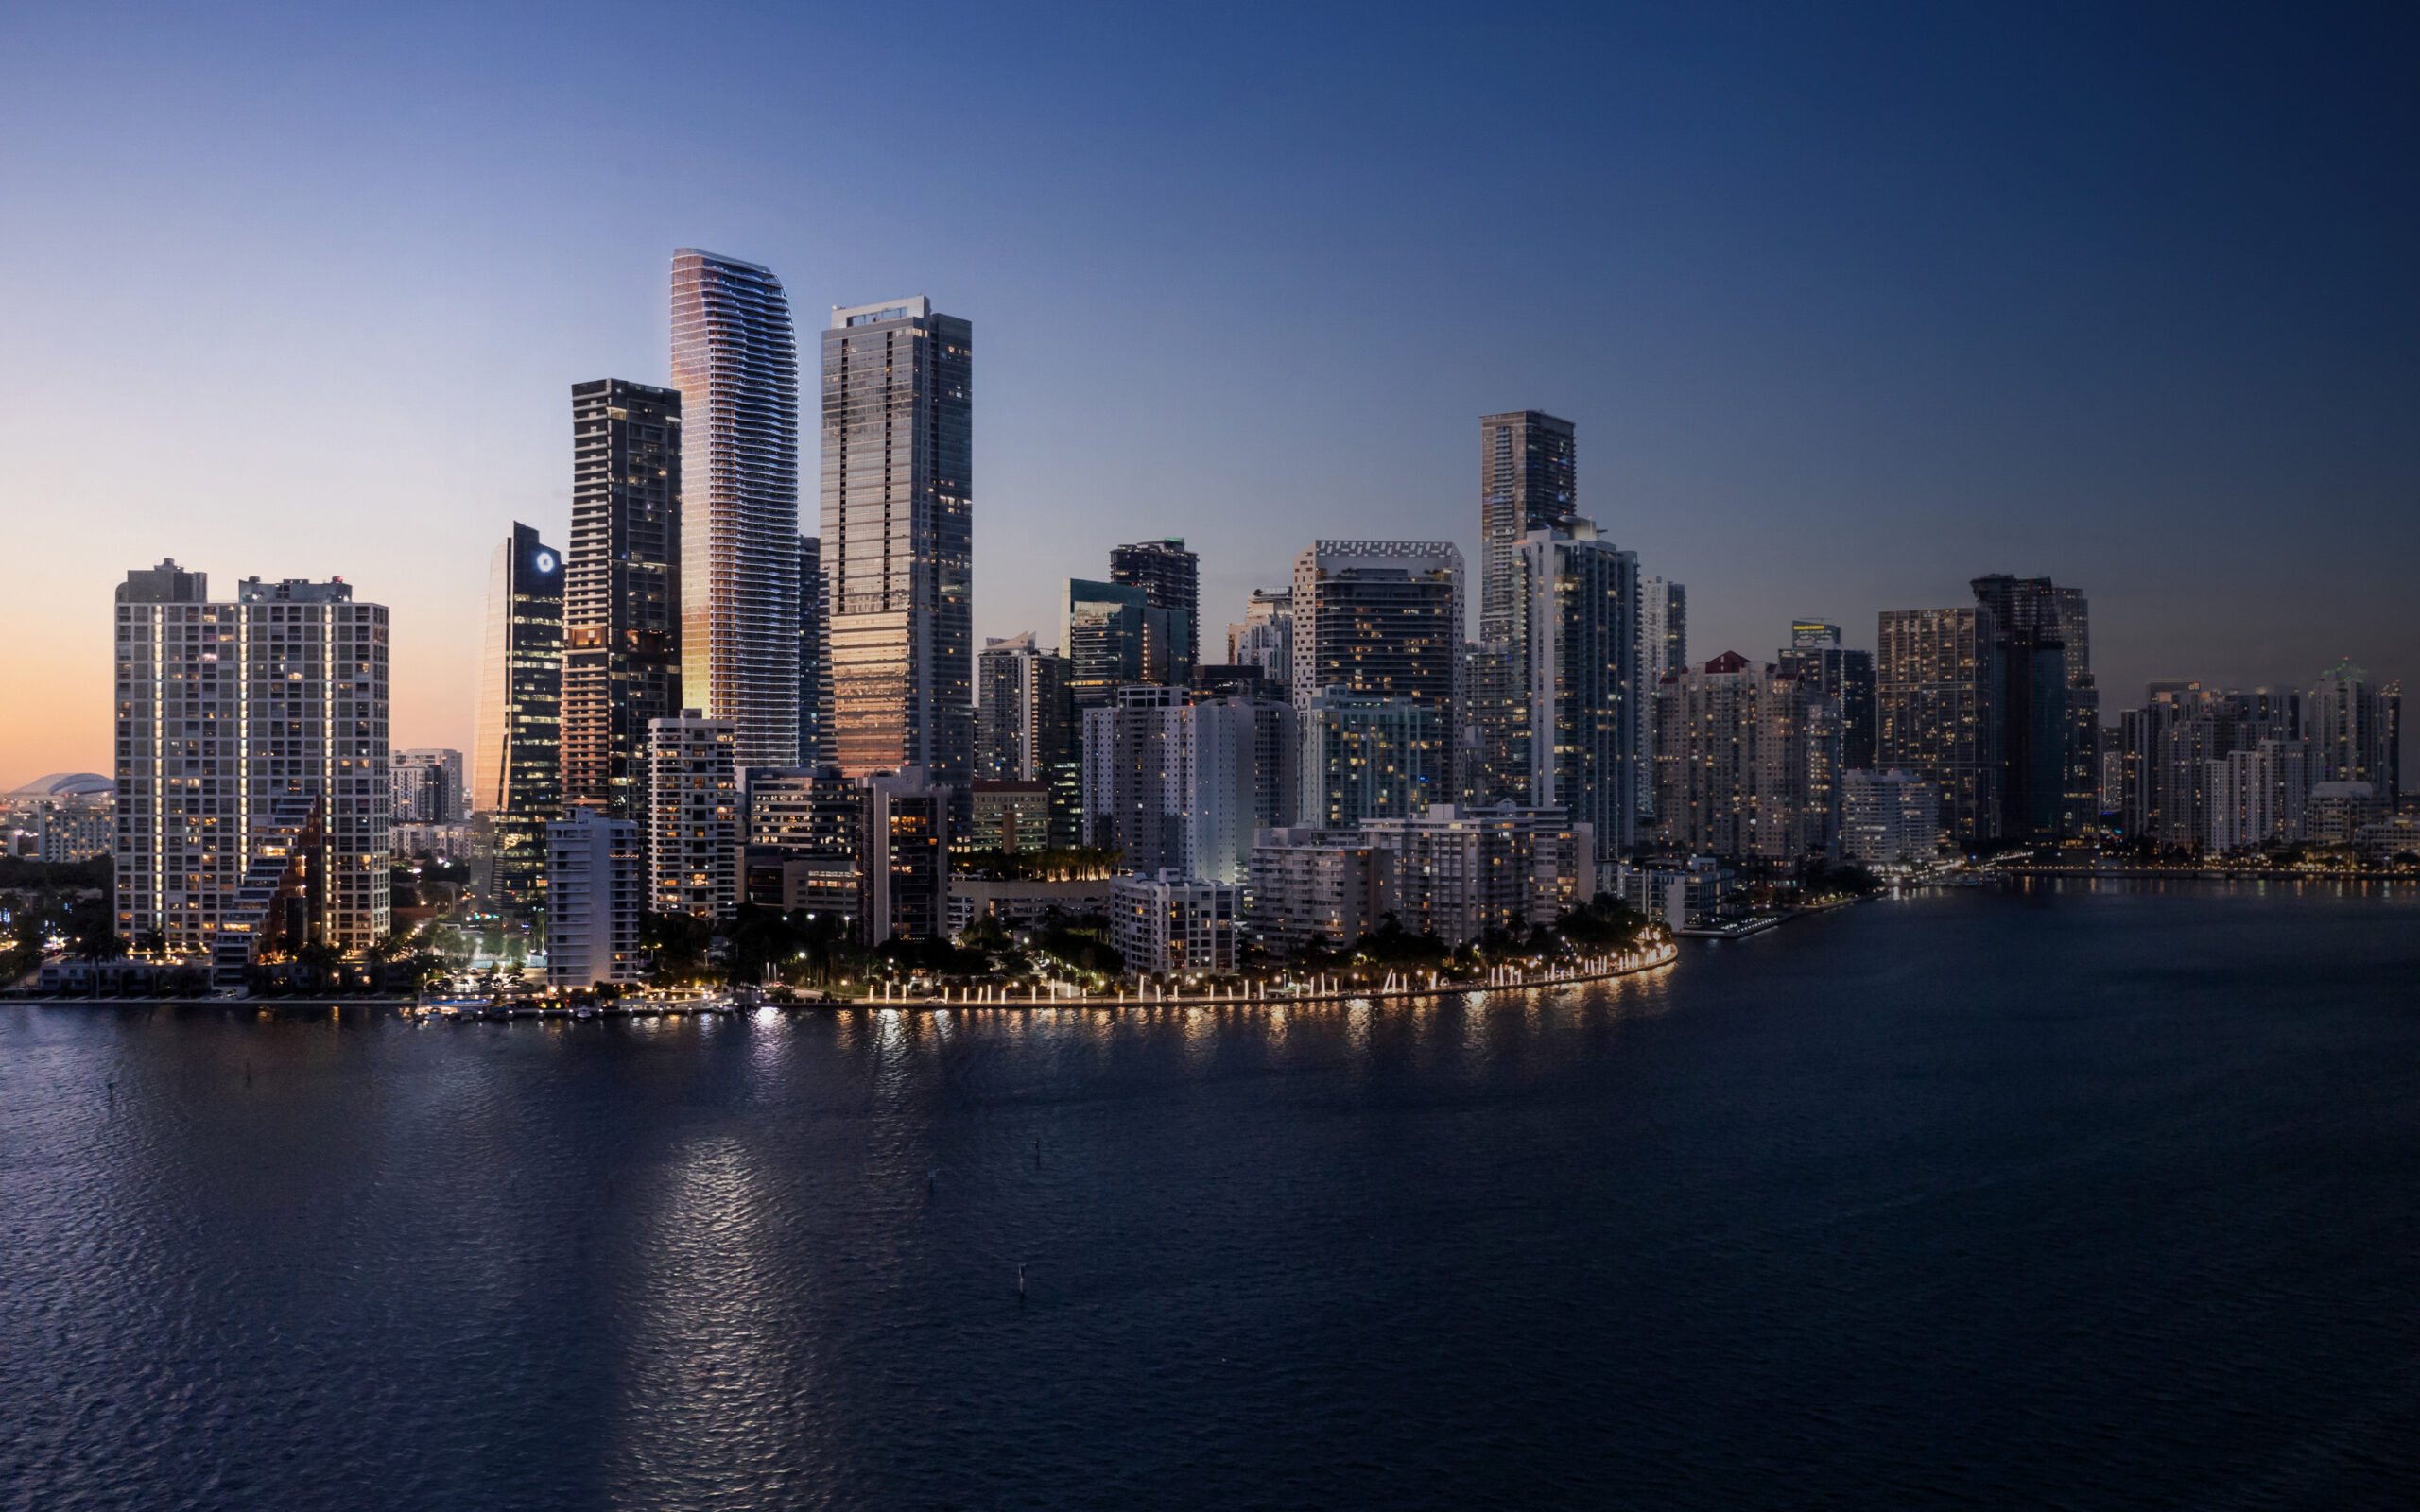 The Residences at 1428 Brickell are an iconic centerpiece of the quintessential Miami skyline